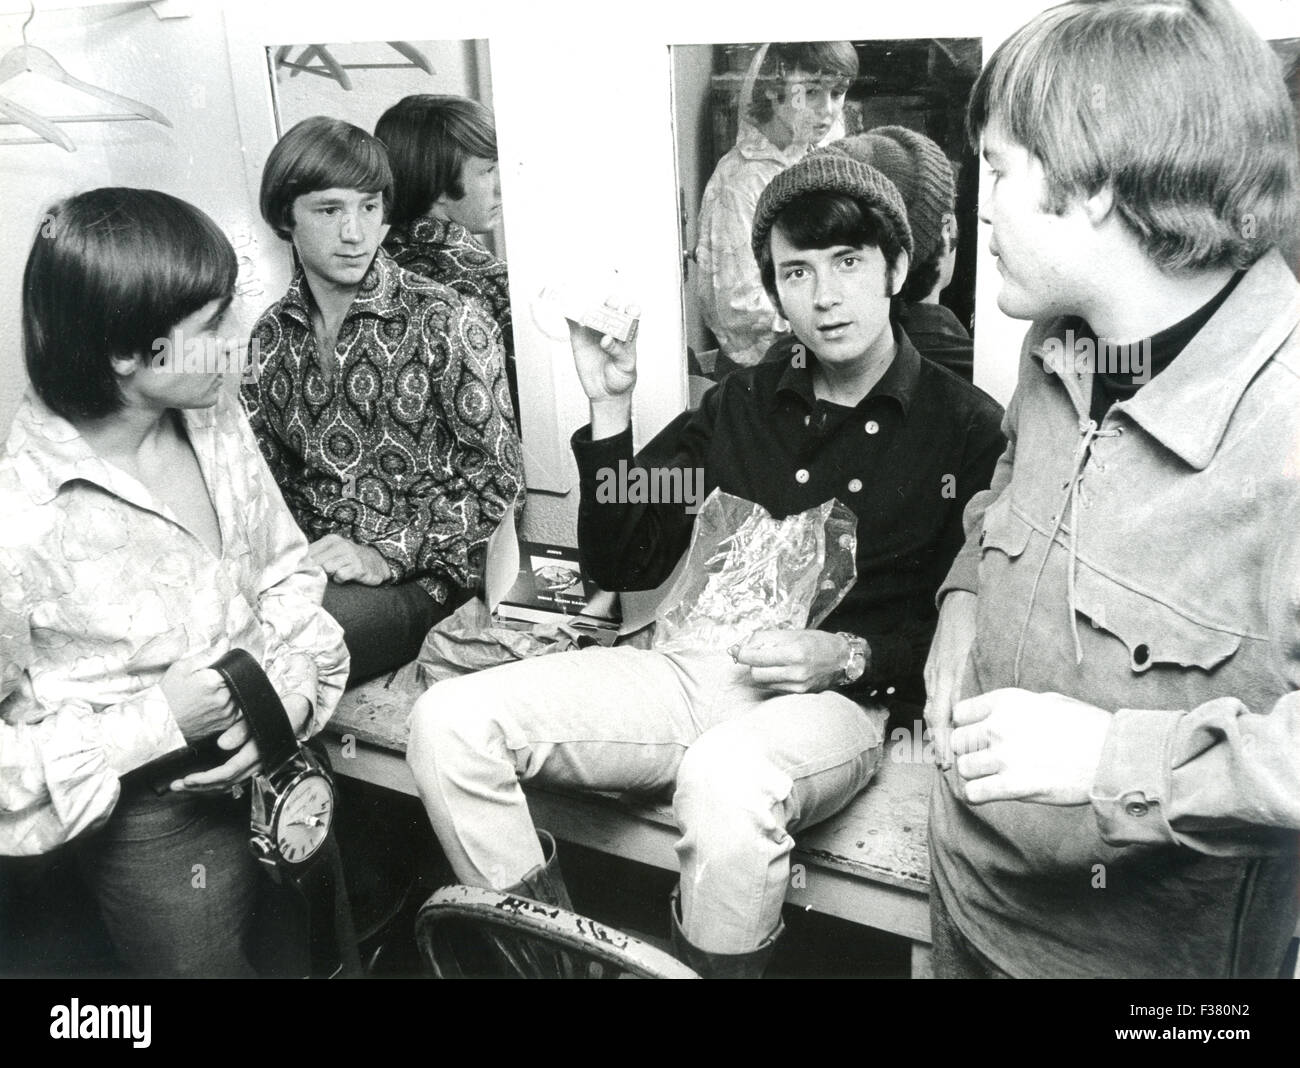 THE MONKEES Anglo-US pop group about 1966. From left: Davy Jones, Peter Tork, Michael Nesmith, Micky Dolenz Stock Photo